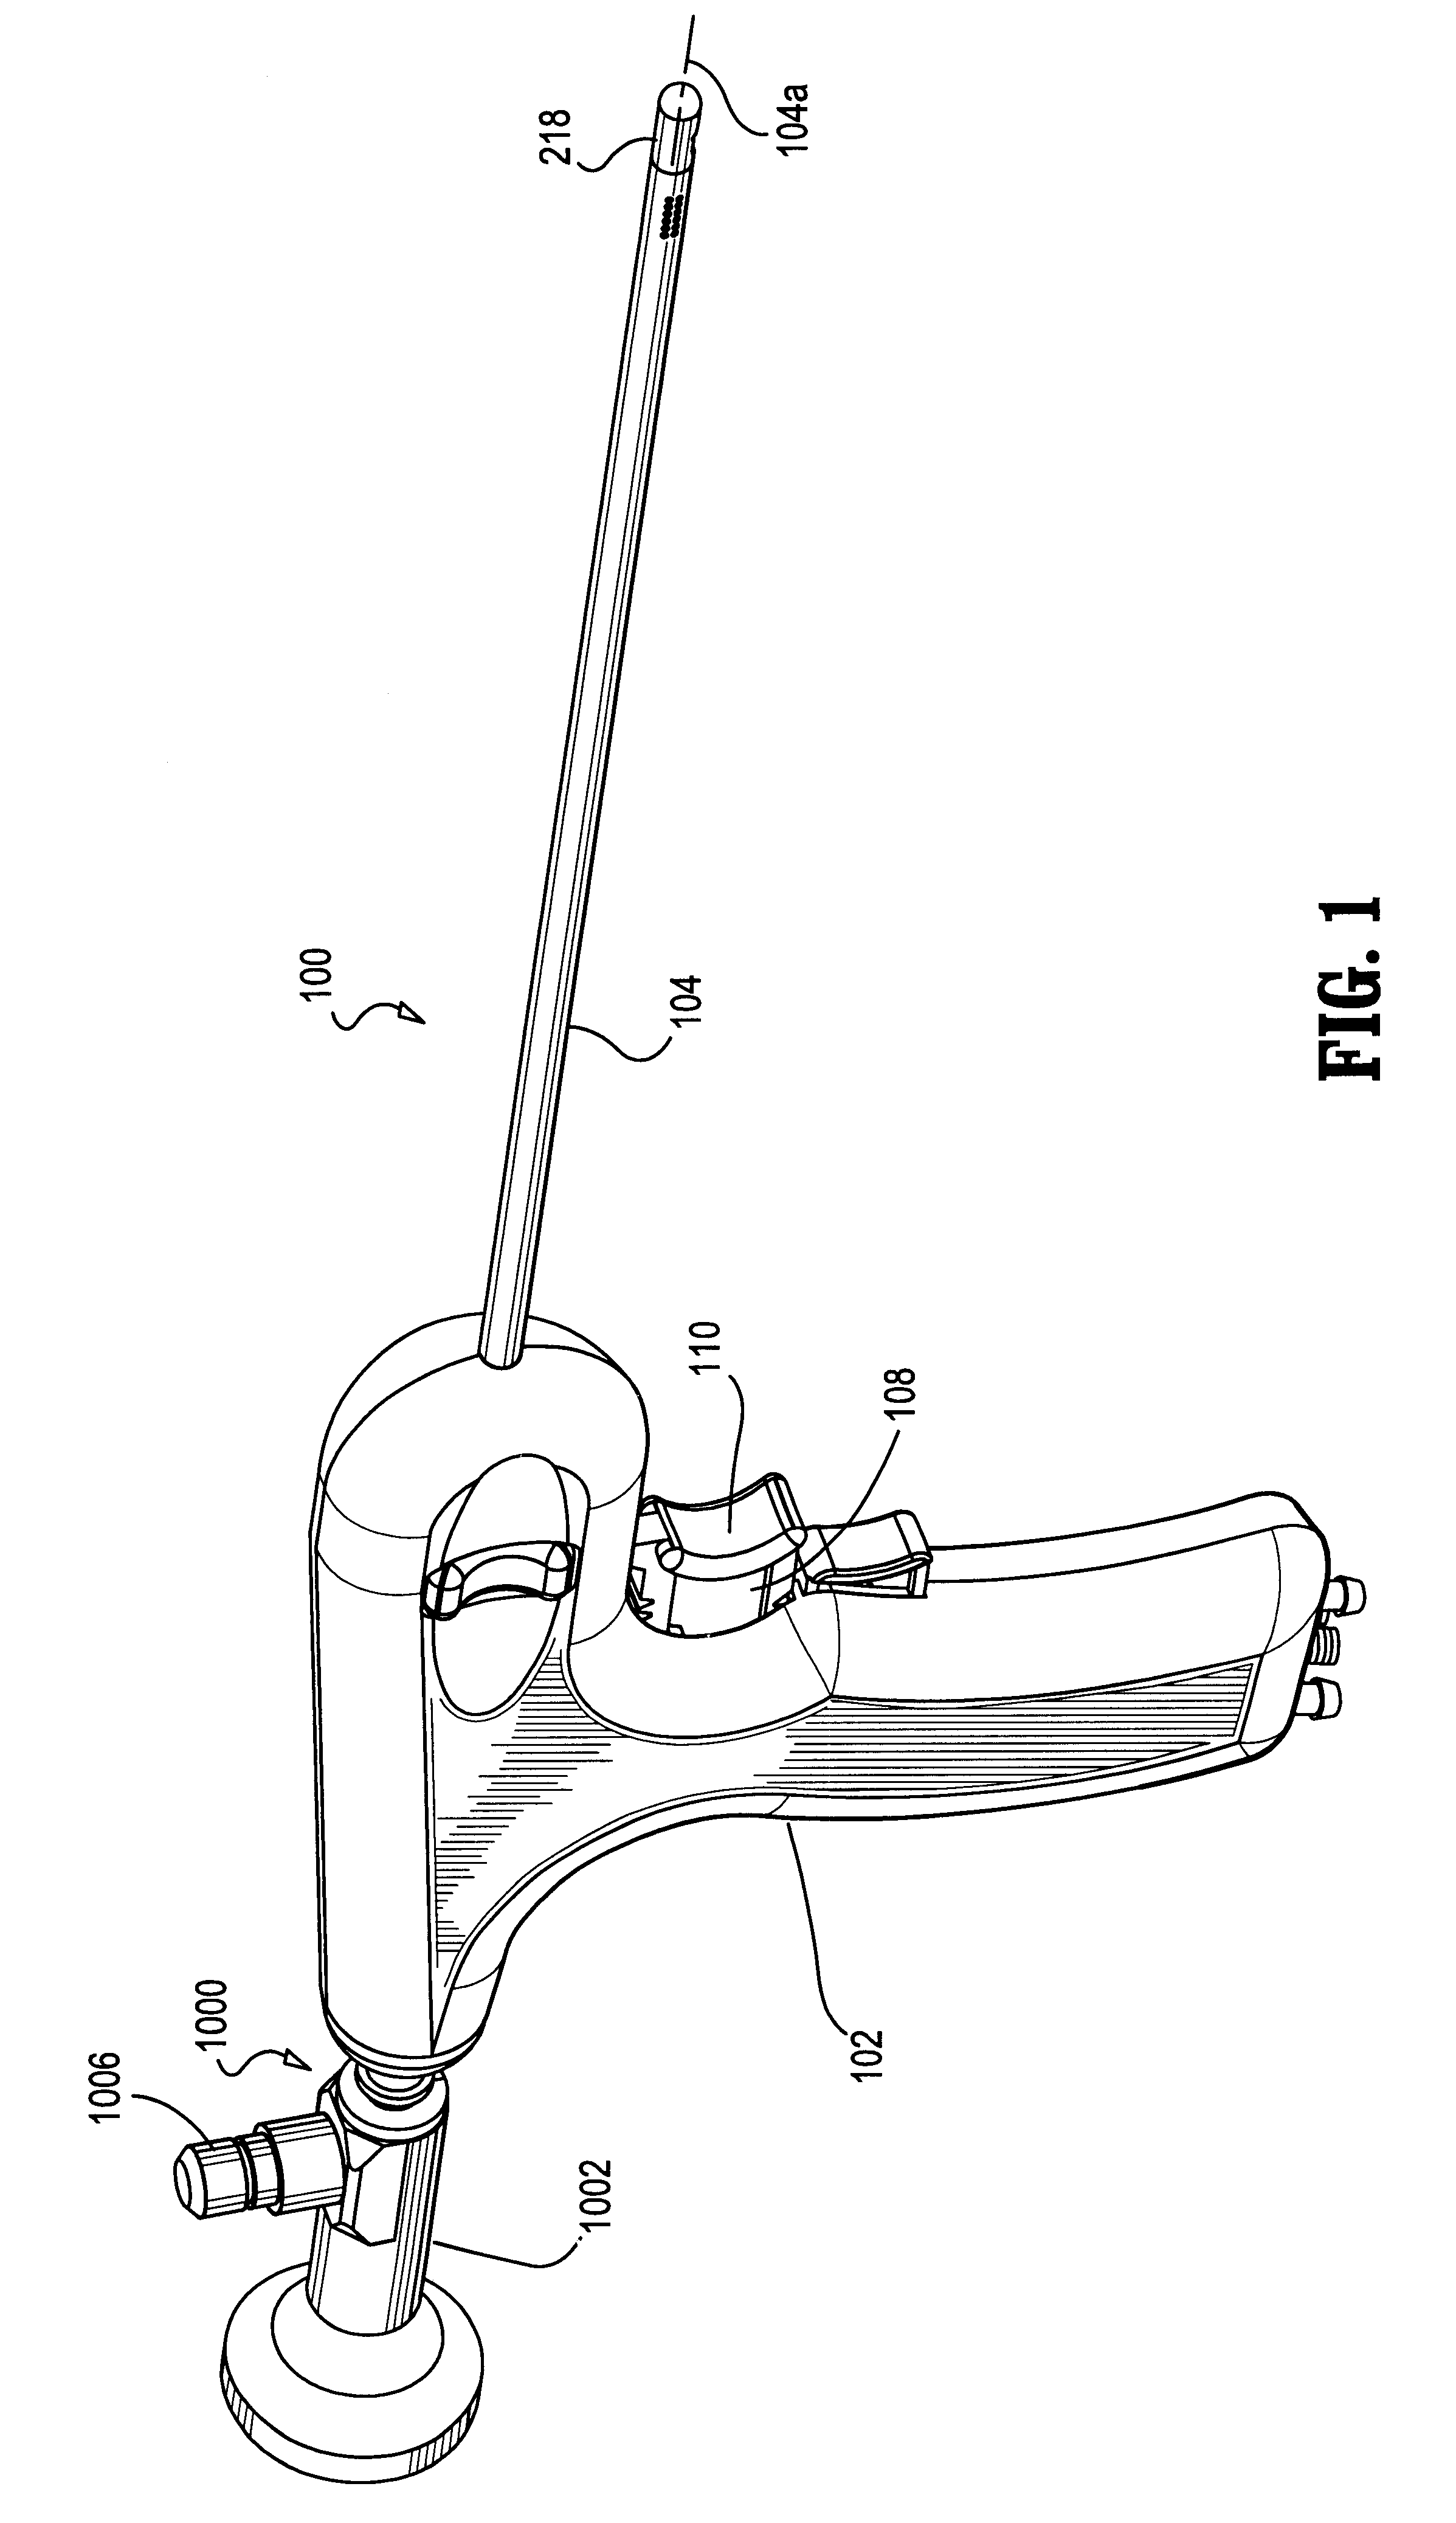 Apparatus and method for thermal treatment of body tissue